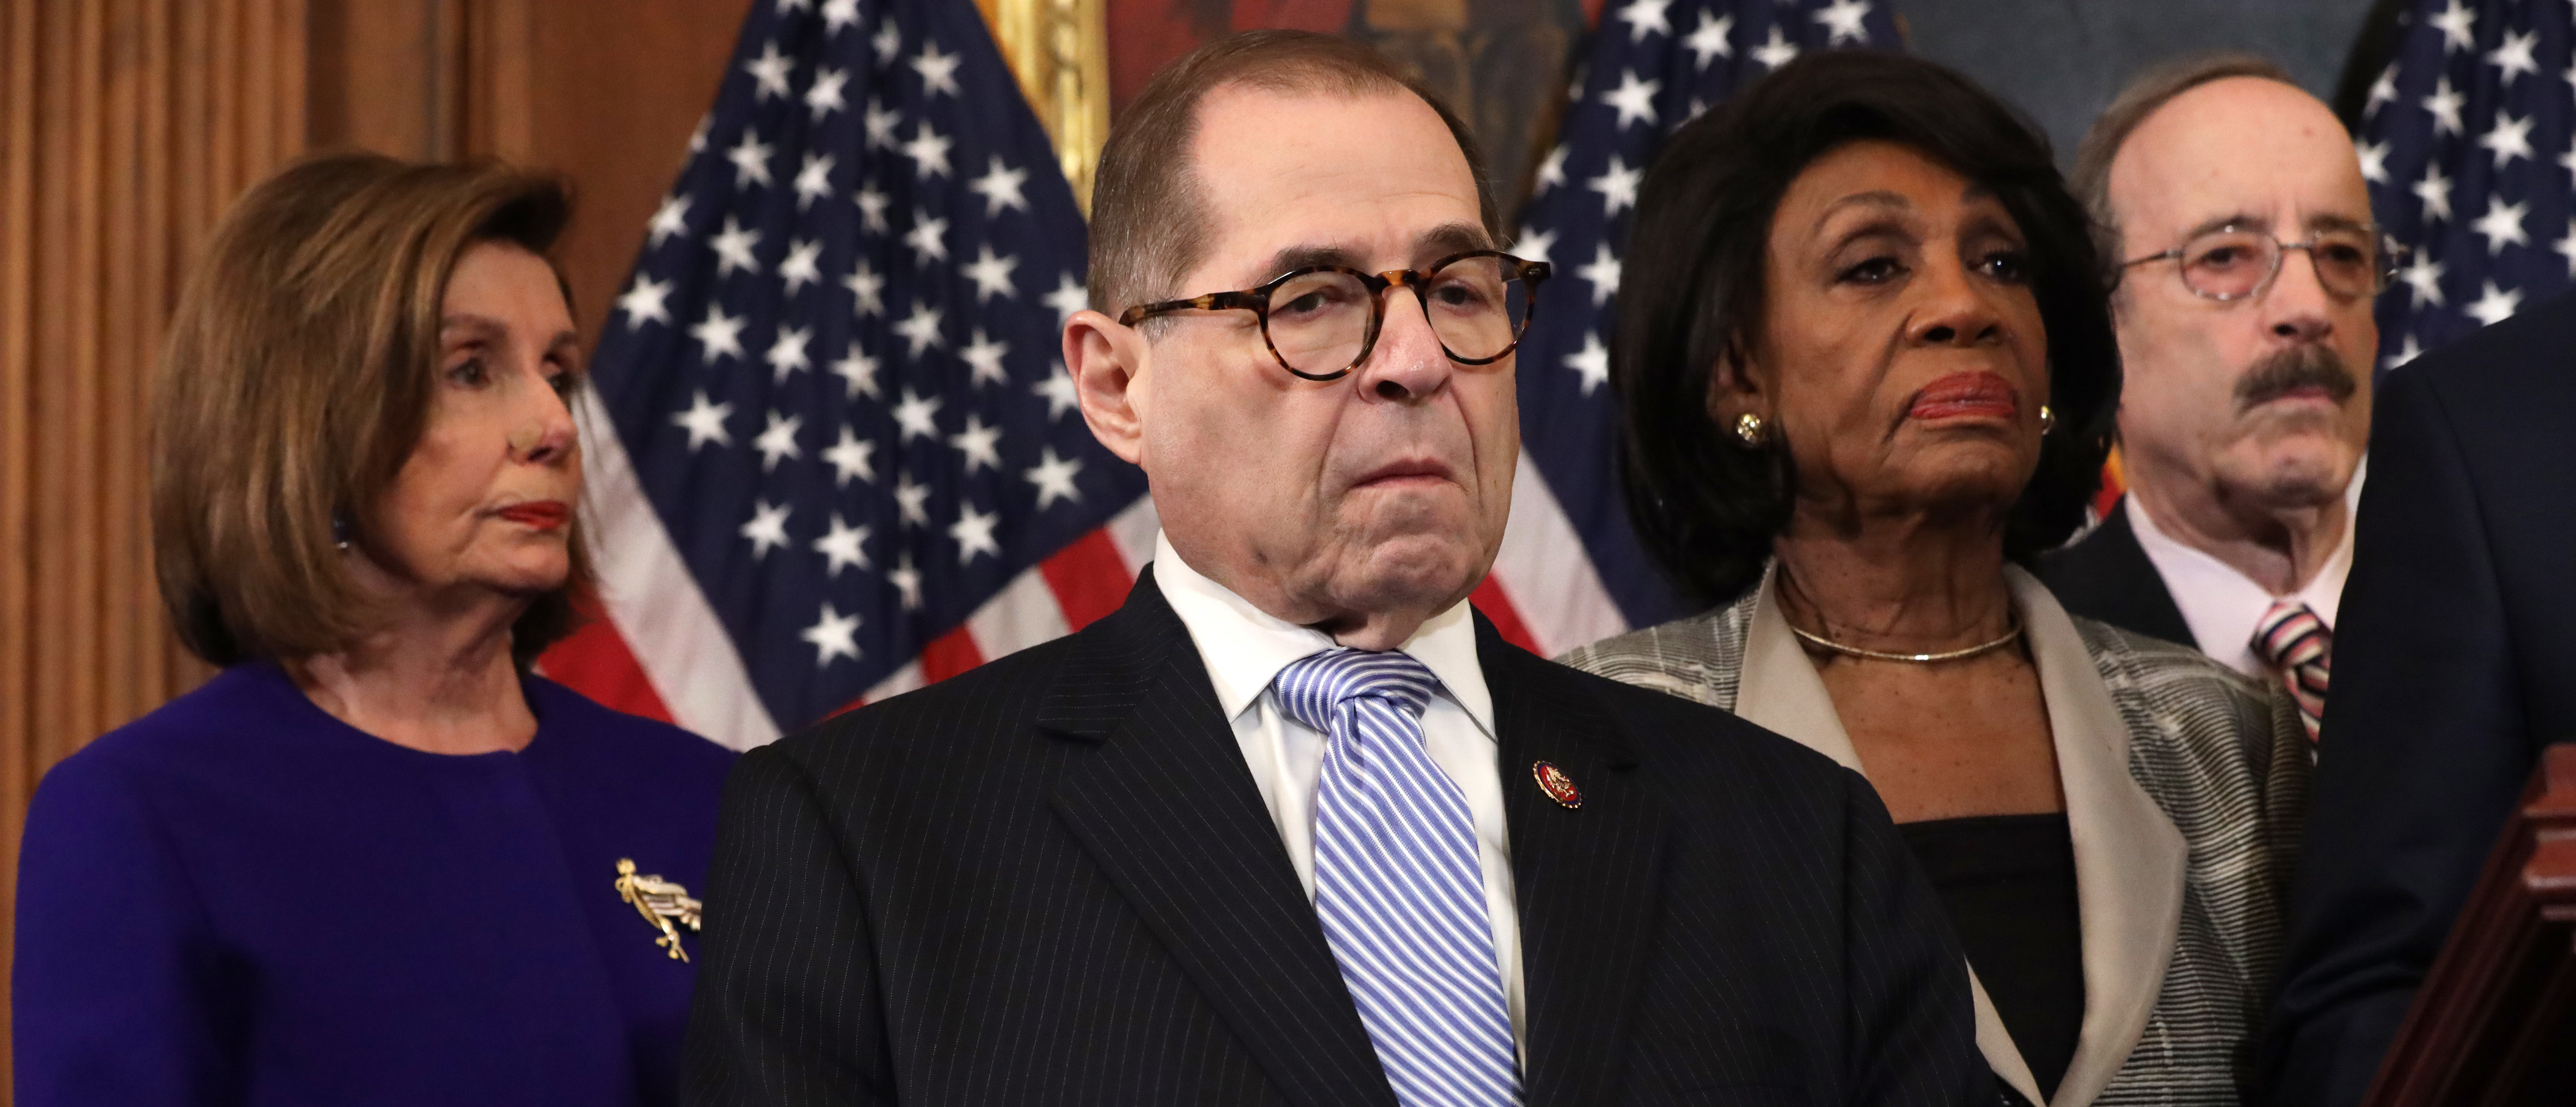 (L-R) Speaker of the House Rep. Nancy Pelosi (D-CA), Chairman of House Judiciary Committee Rep. Jerry Nadler (D-NY), Chairwoman of House Financial Services Committee Rep. Maxine Waters (D-CA) and Chairman of House Foreign Affairs Committee Rep. Eliot Engel (D-NY) listen during a news conference at the U.S. Capitol December 10, 2019 in Washington, DC. Chairman Nadler announced that the House Judiciary Committee is introducing two articles on abuse of power and obstruction of Congress for the next steps in the House impeachment inquiry against President Donald Trump. (Photo by Alex Wong/Getty Images)